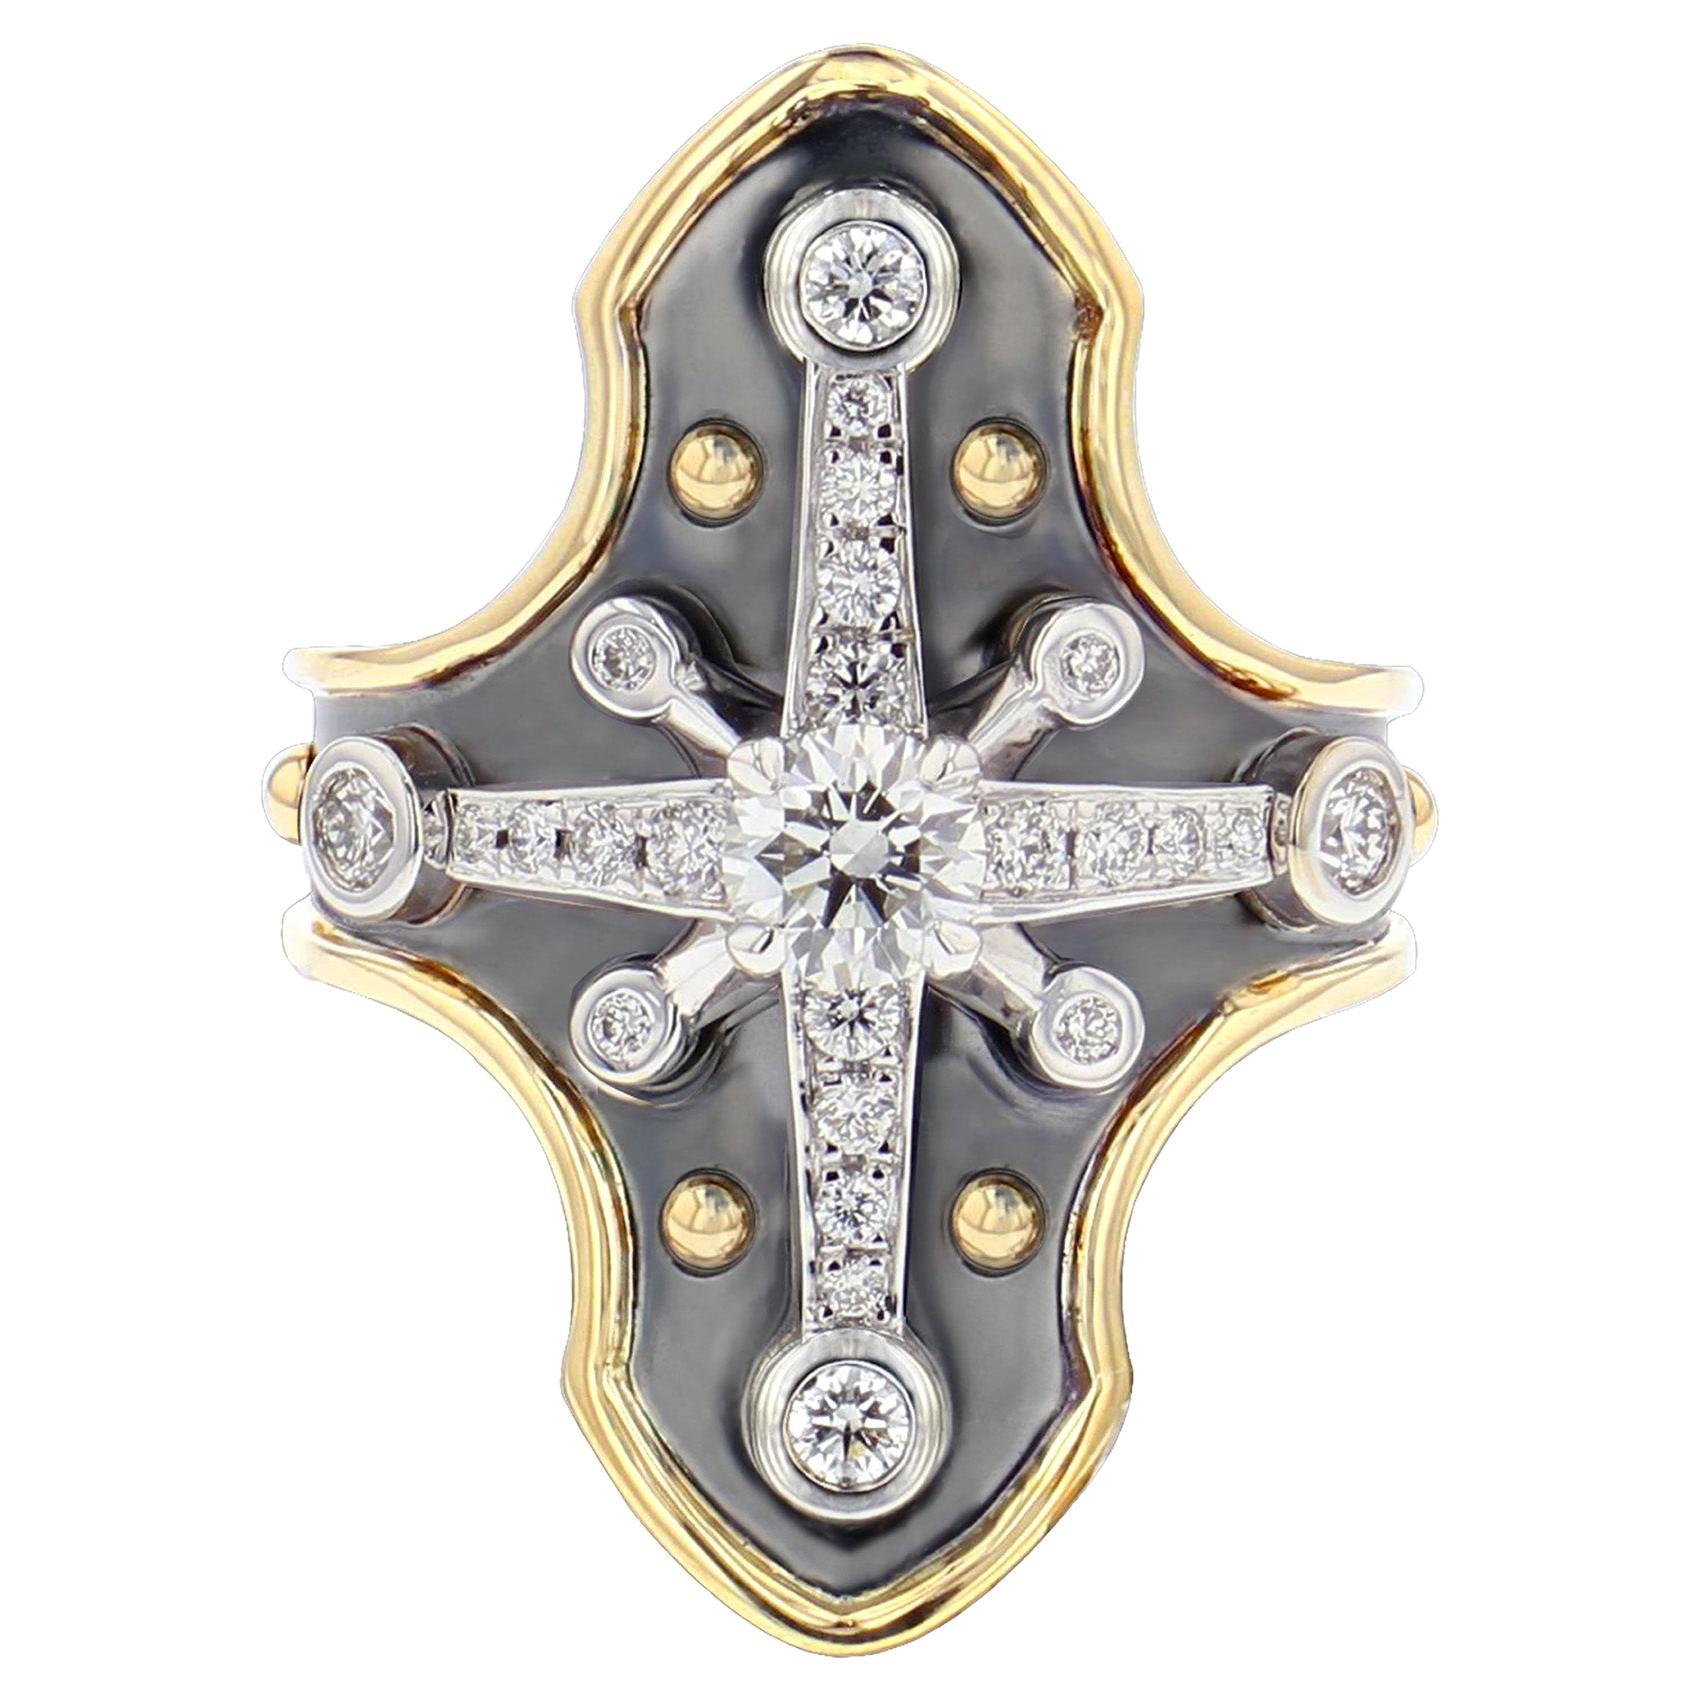 Yellow gold and distressed silver ring studded with a diamond surrounded by diamonds set on a white gold star.

Details:
Central Diamond: 0.37 cts
24 Diamonds : 0.38 cts 
18k Gold : 5 g 
Distressed Silver : 3.5 g
Made in France